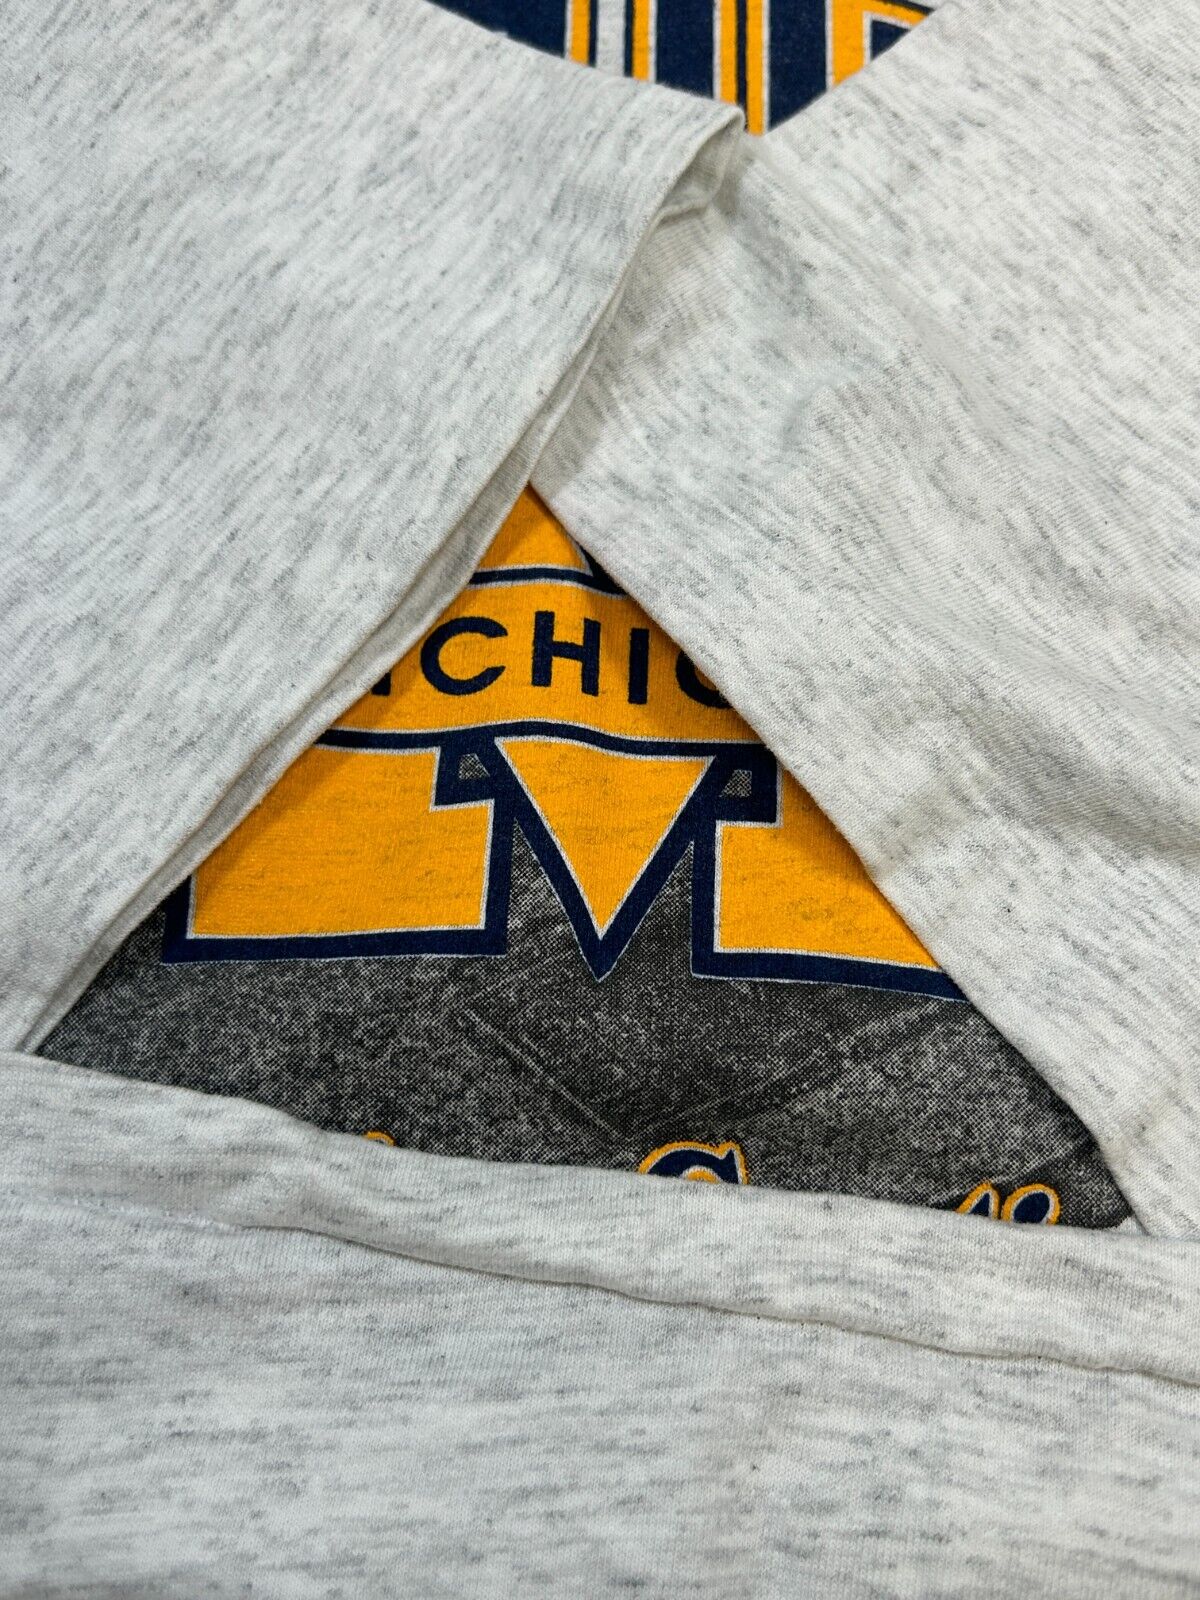 Vintage 1997 Michigan Wolverines 118 Years Of Football NCAA T-Shirt Size 2XL